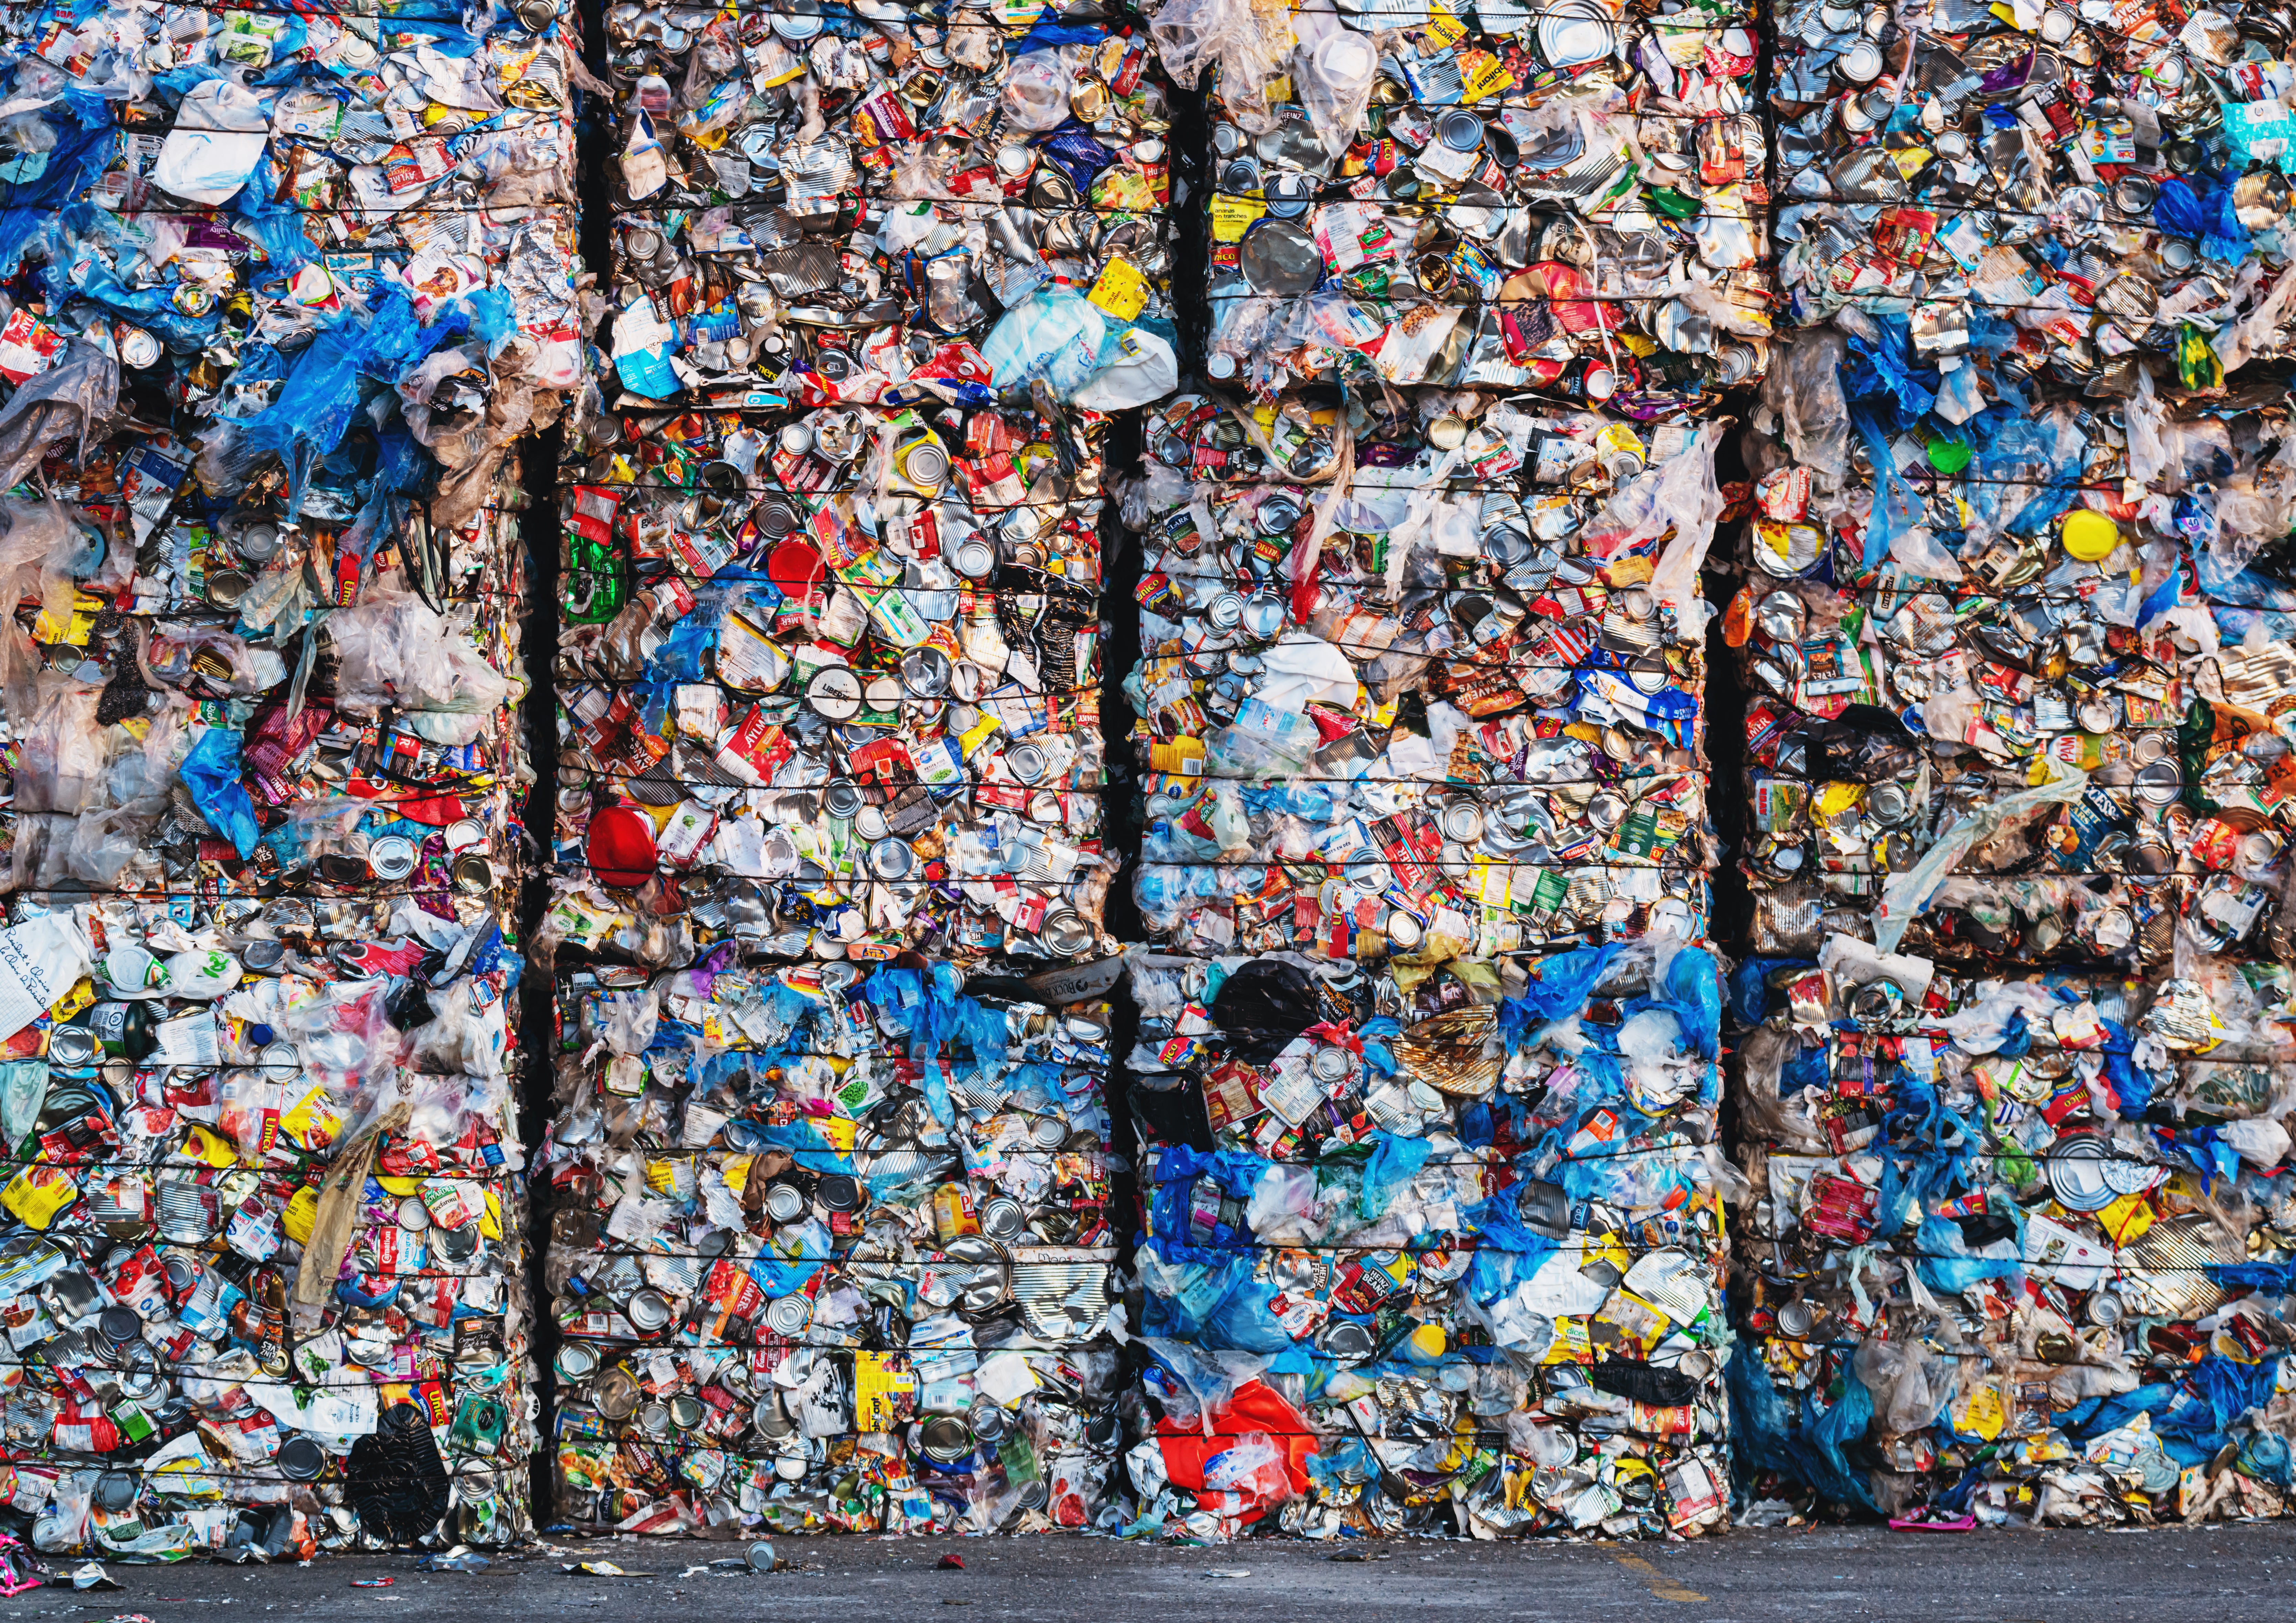 Large bundles of plastic bags, cans and milk containers await processing at a recycling center in Canada.